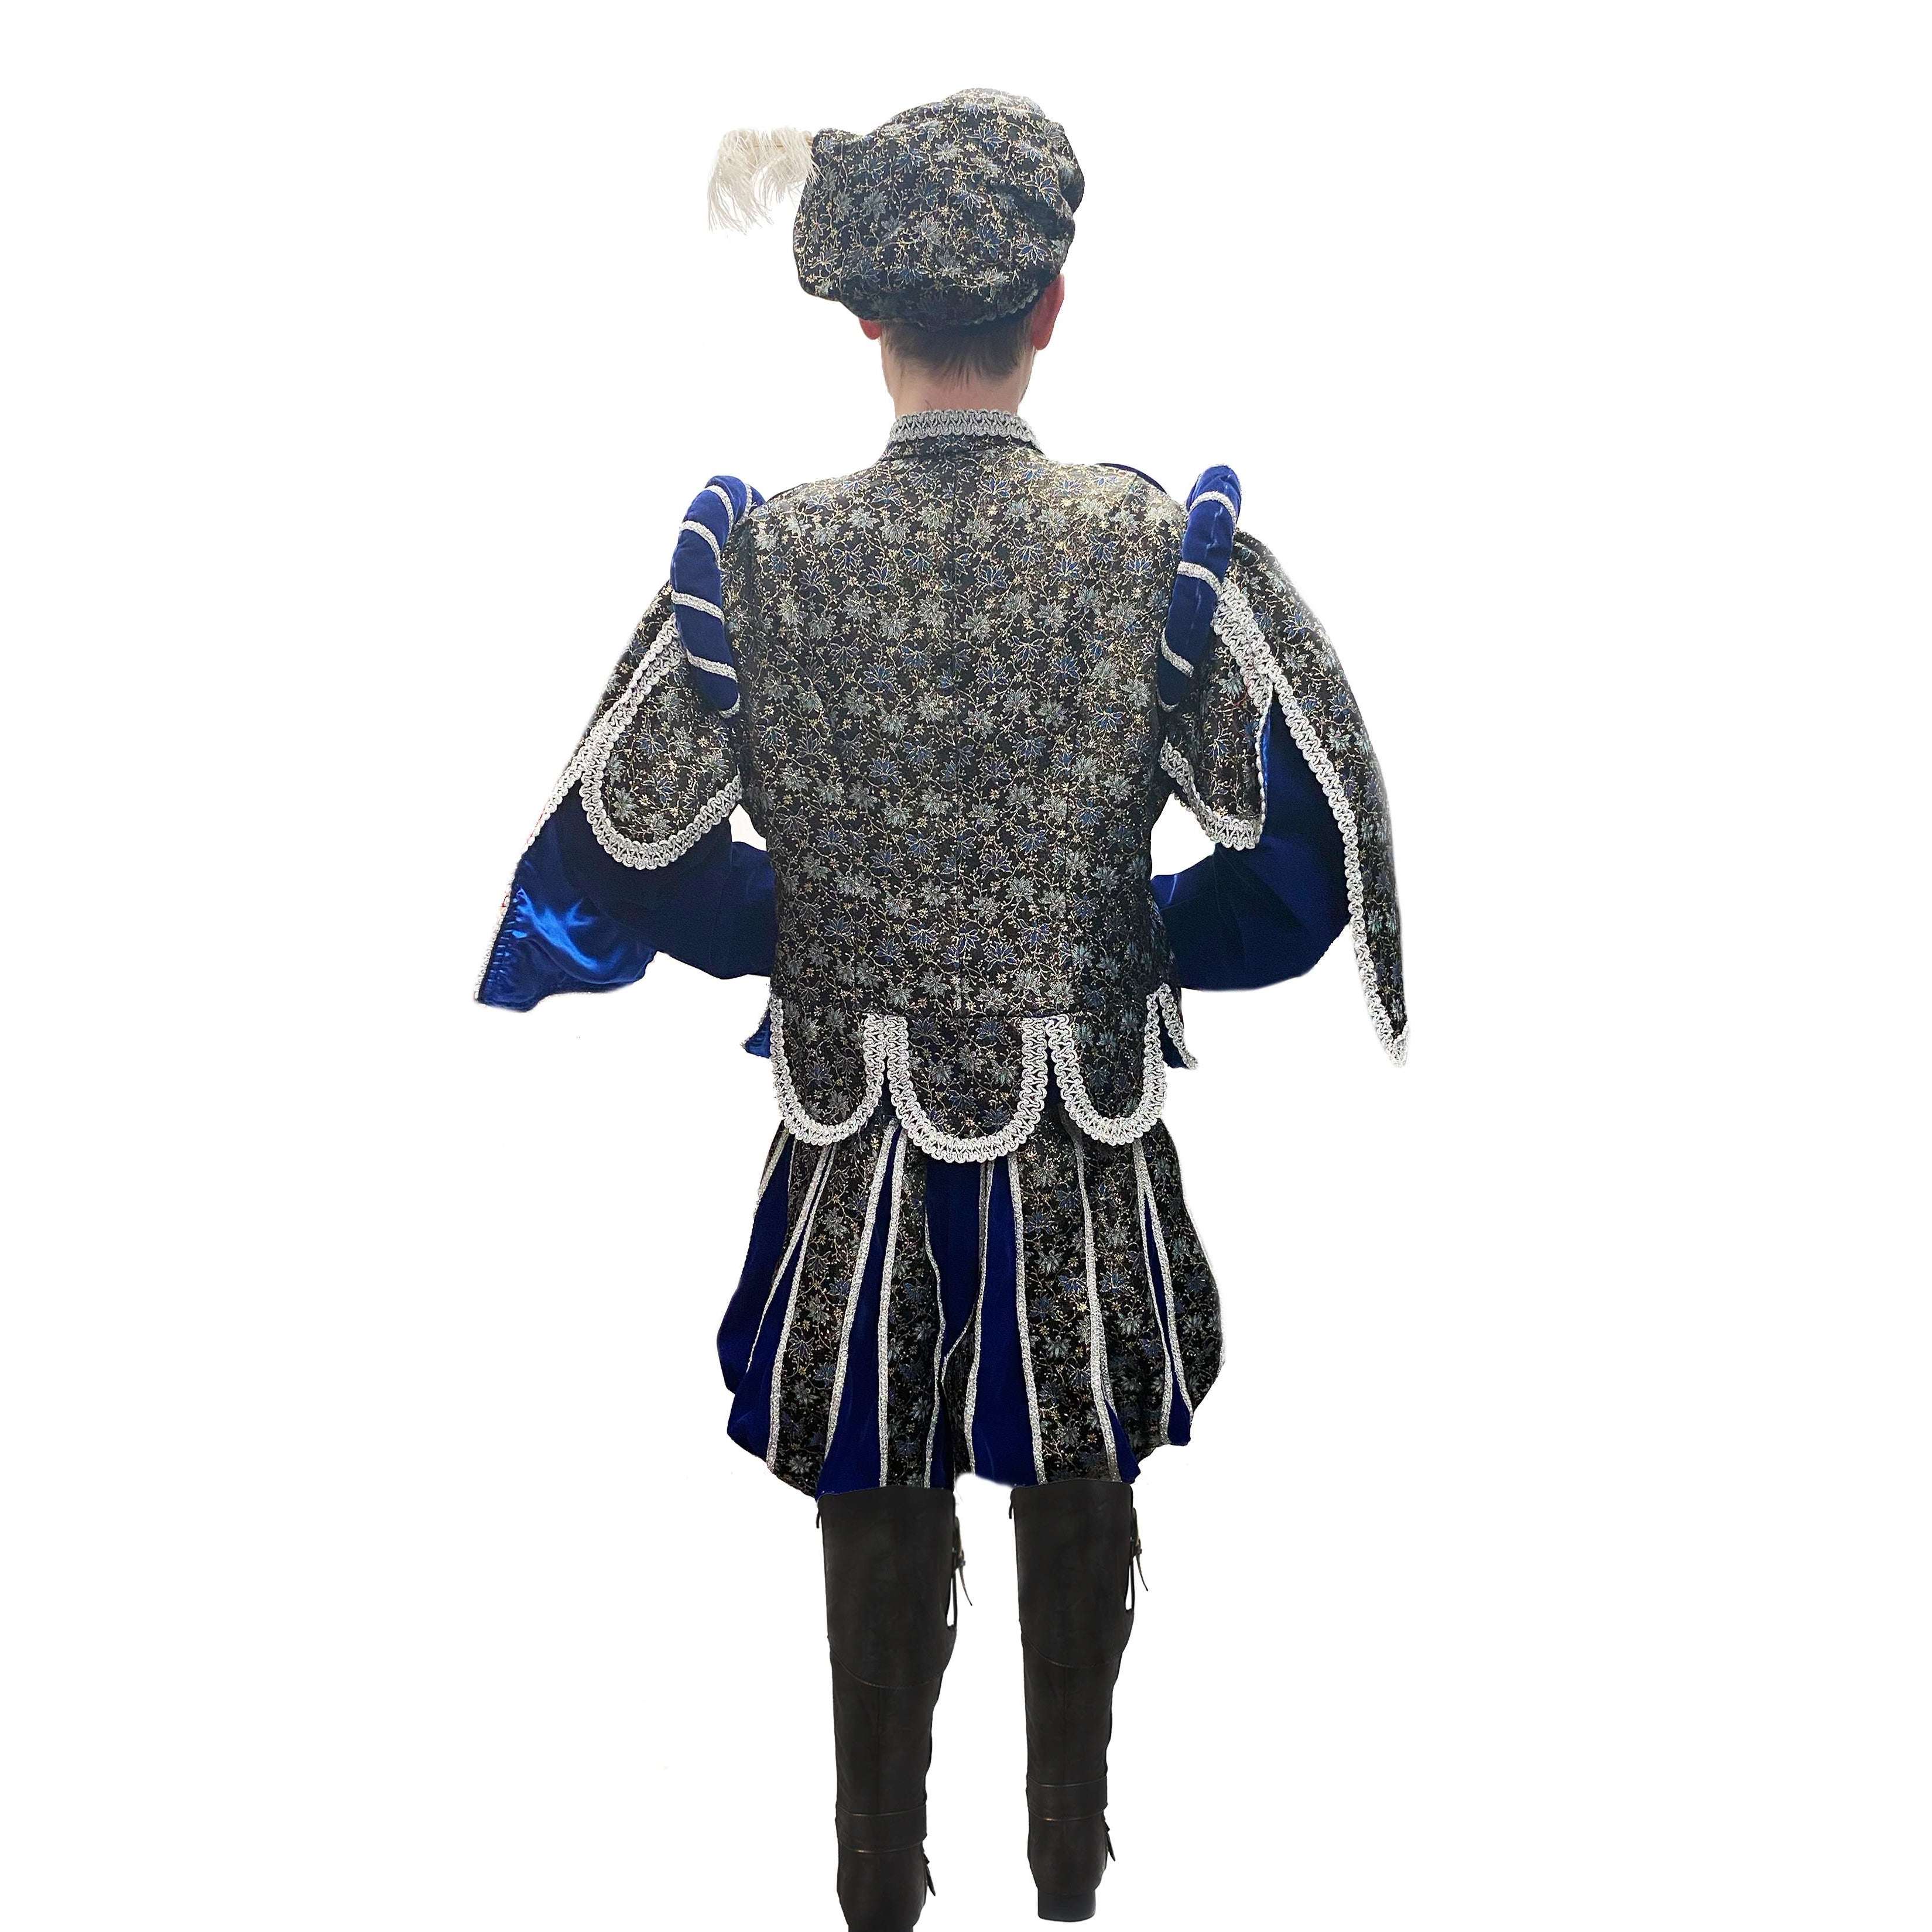 Deluxe Adult Blue Royal King Costume - Blue - S